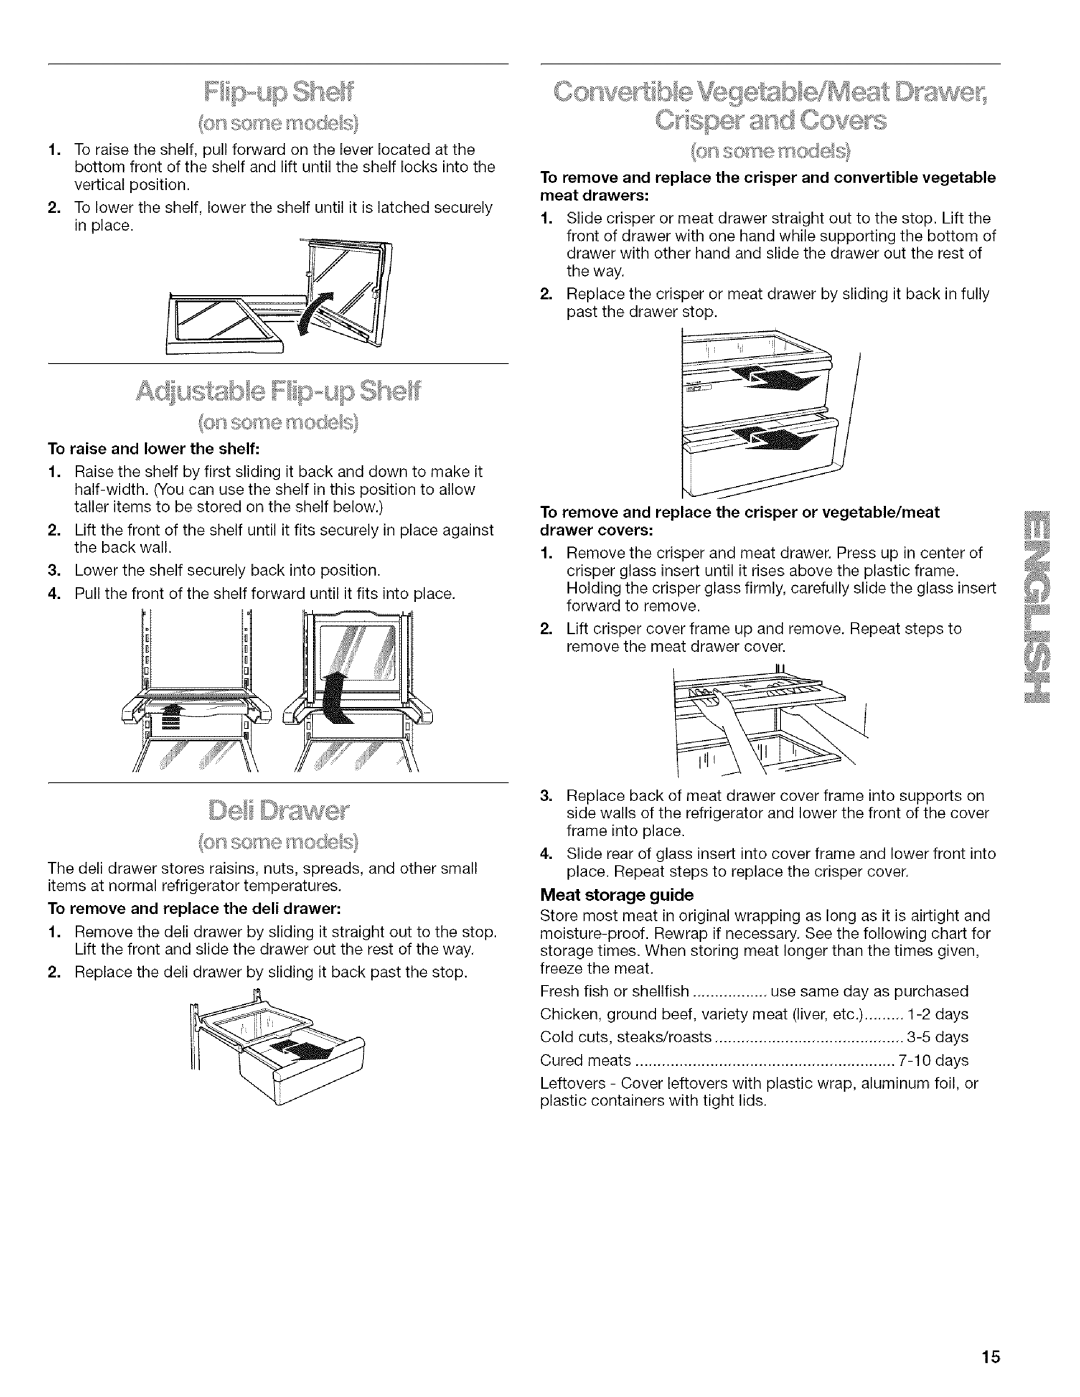 Kenmore 2205960 manual To raise and lower the shelf, Meat storage guide 